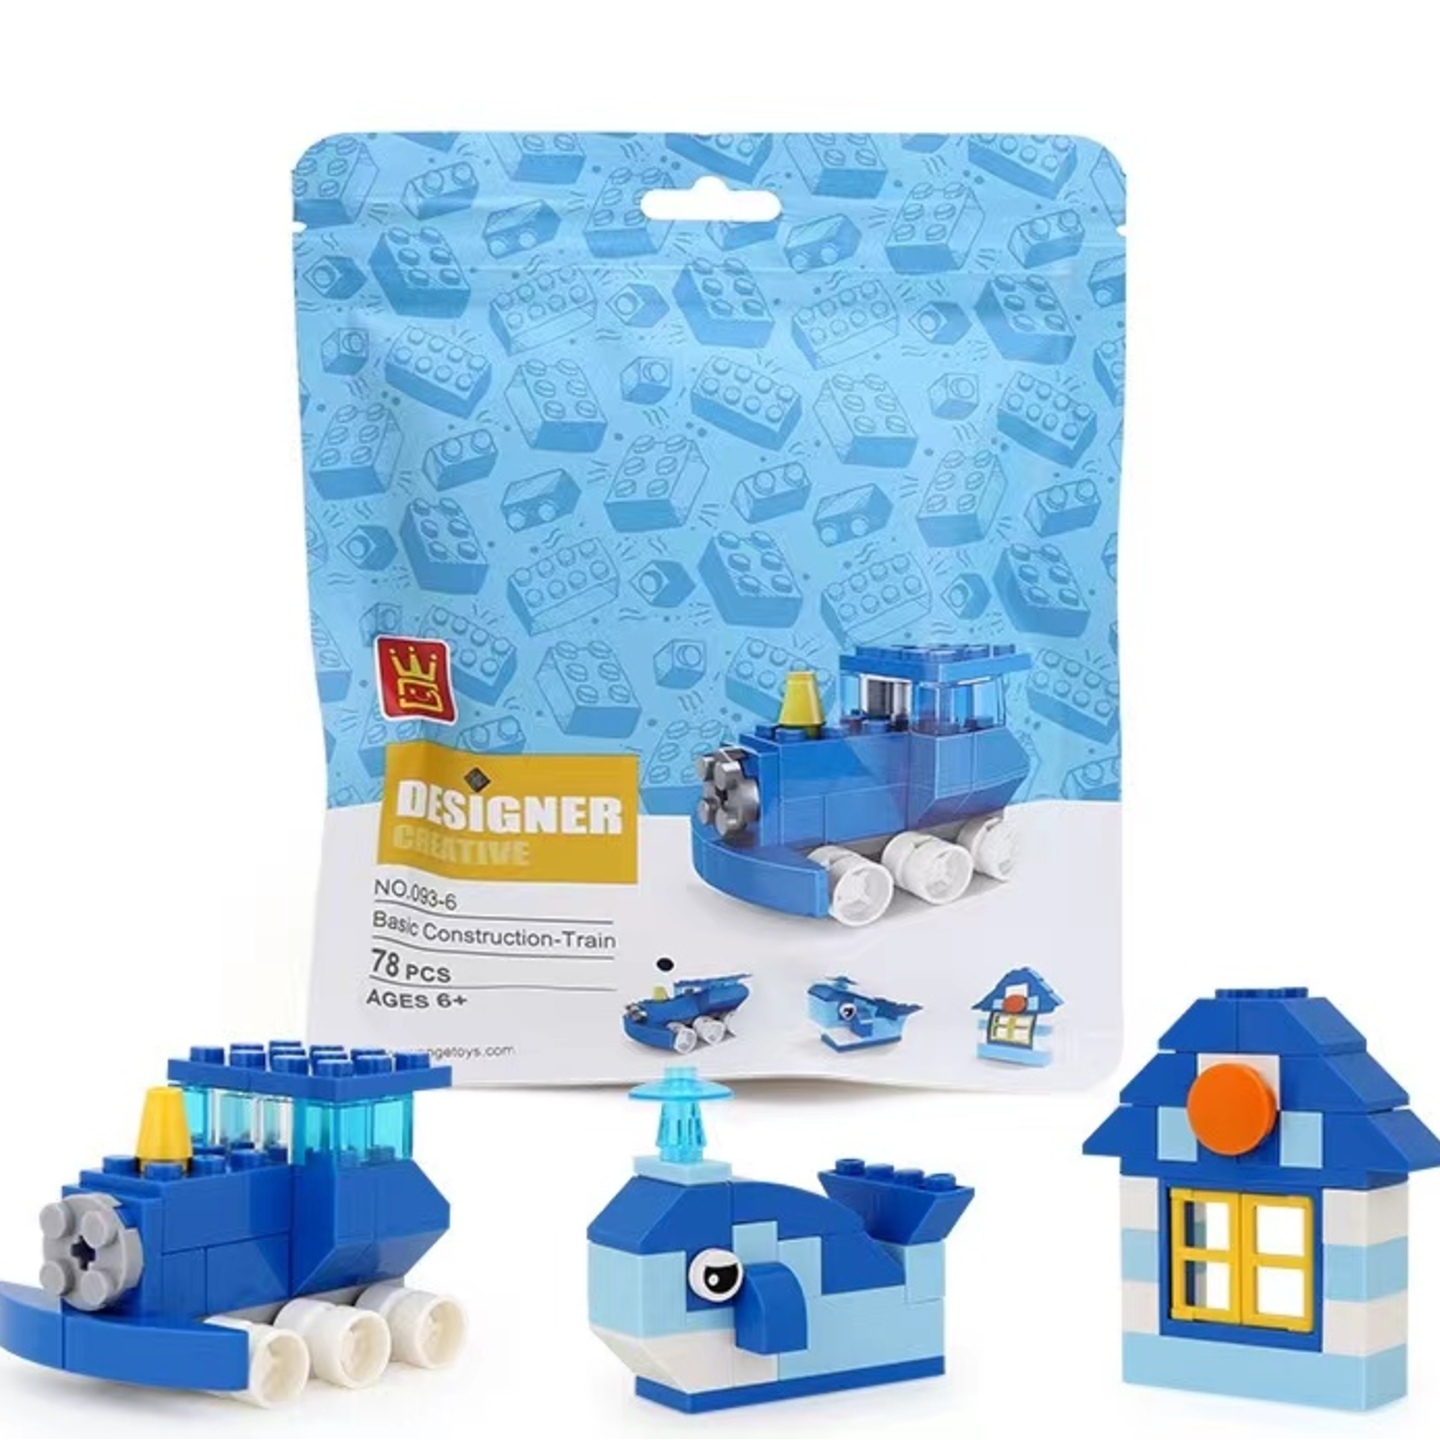 Intellectual Toy Bricks for Creative Play - Blue 78 pcs